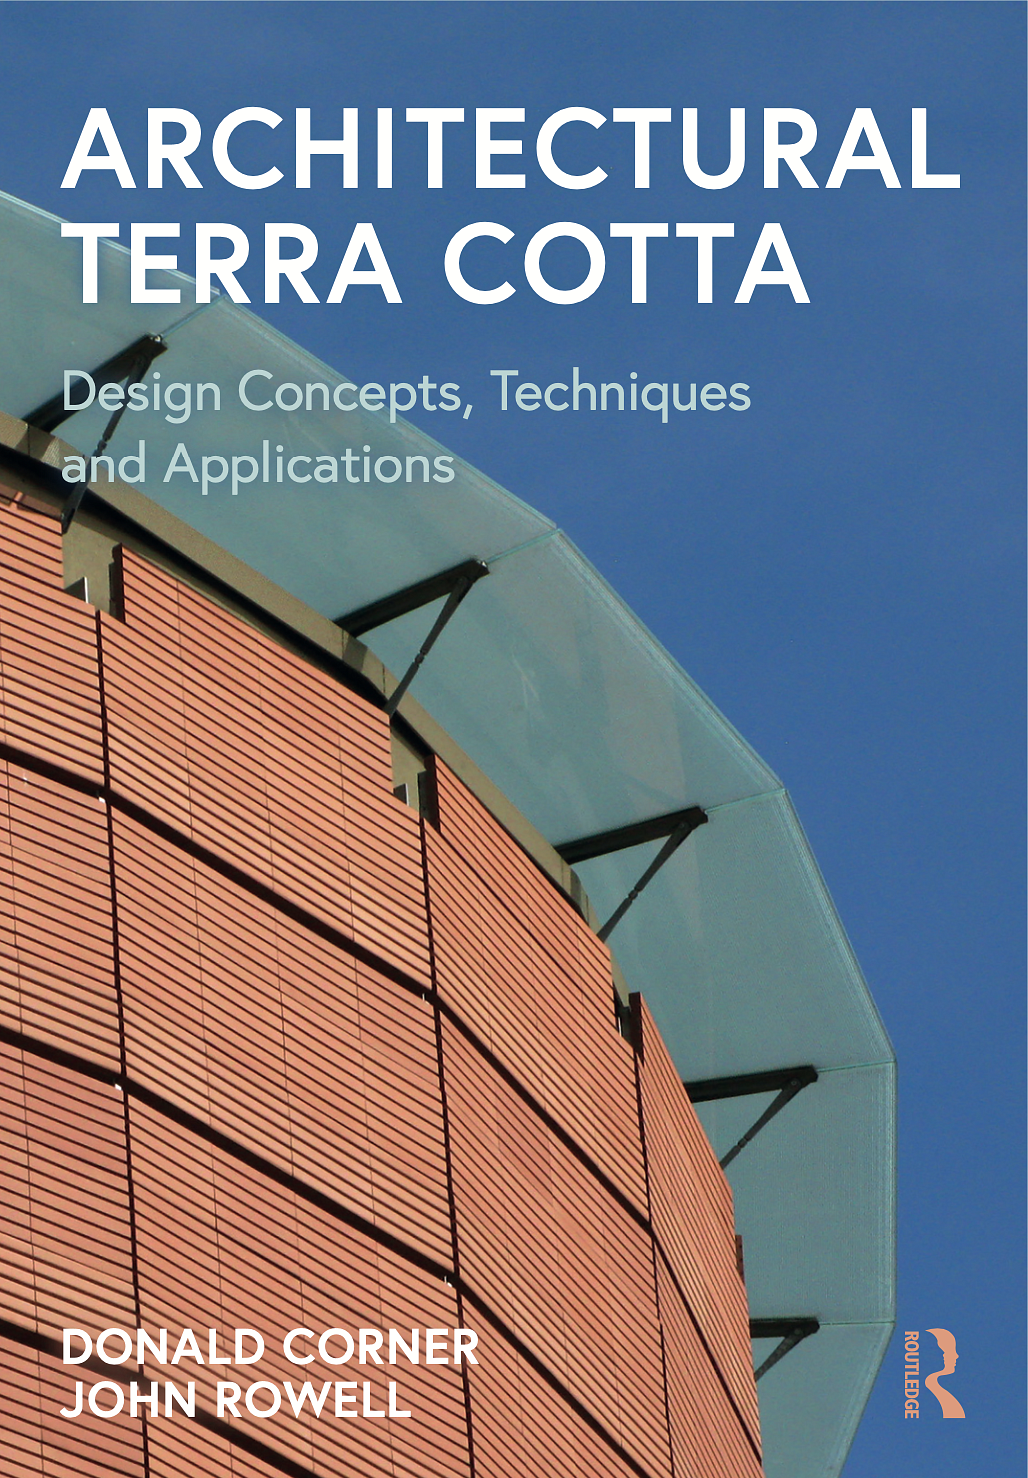 Cover of Architectural Terra Cotta, a photo of a building with terra cotta "bricks"